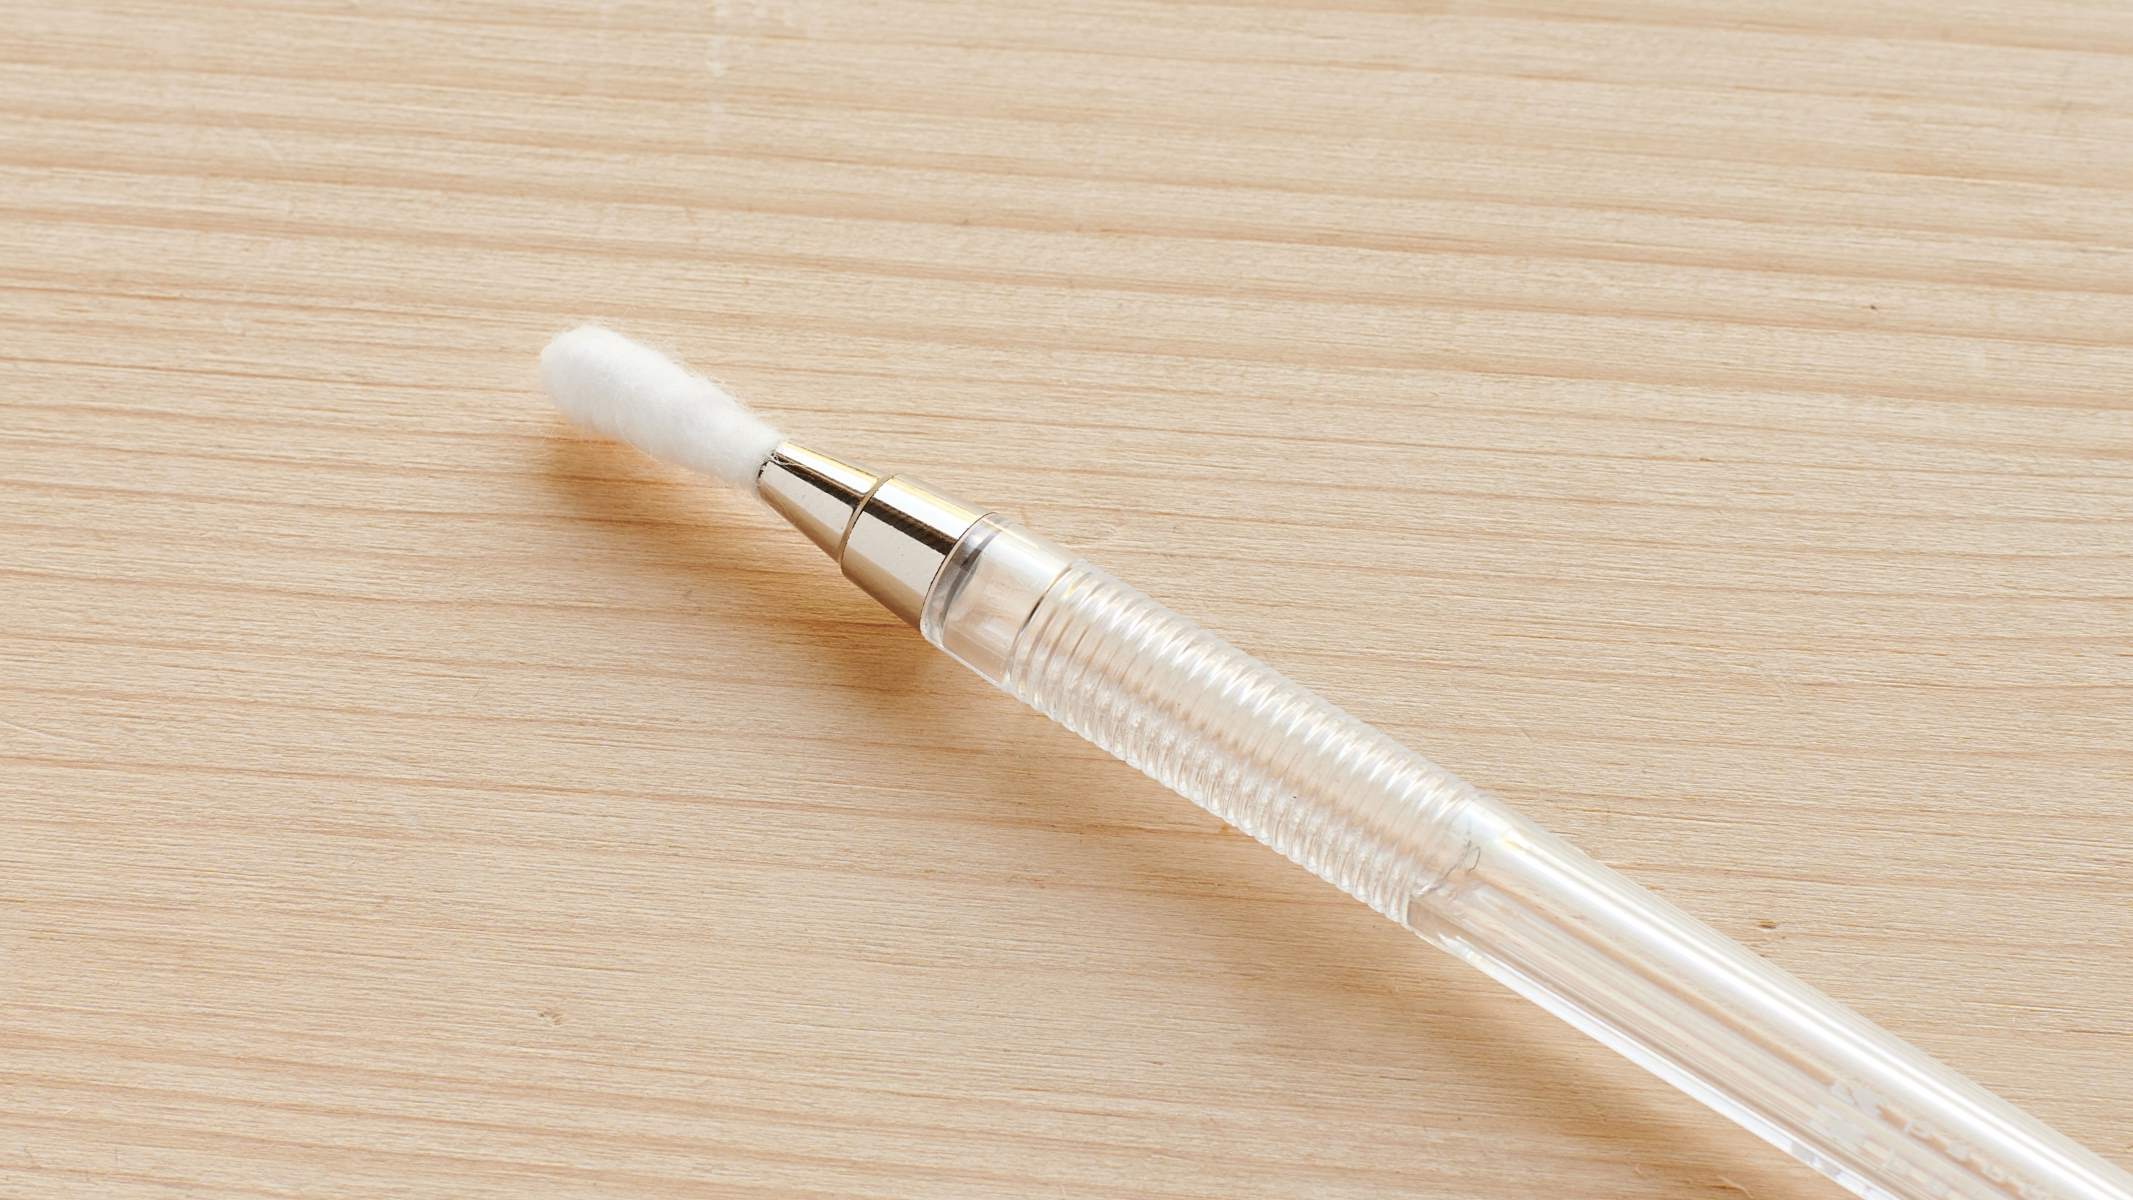 Crafting Magic: Creating Your Own Stylus – DIY Guide